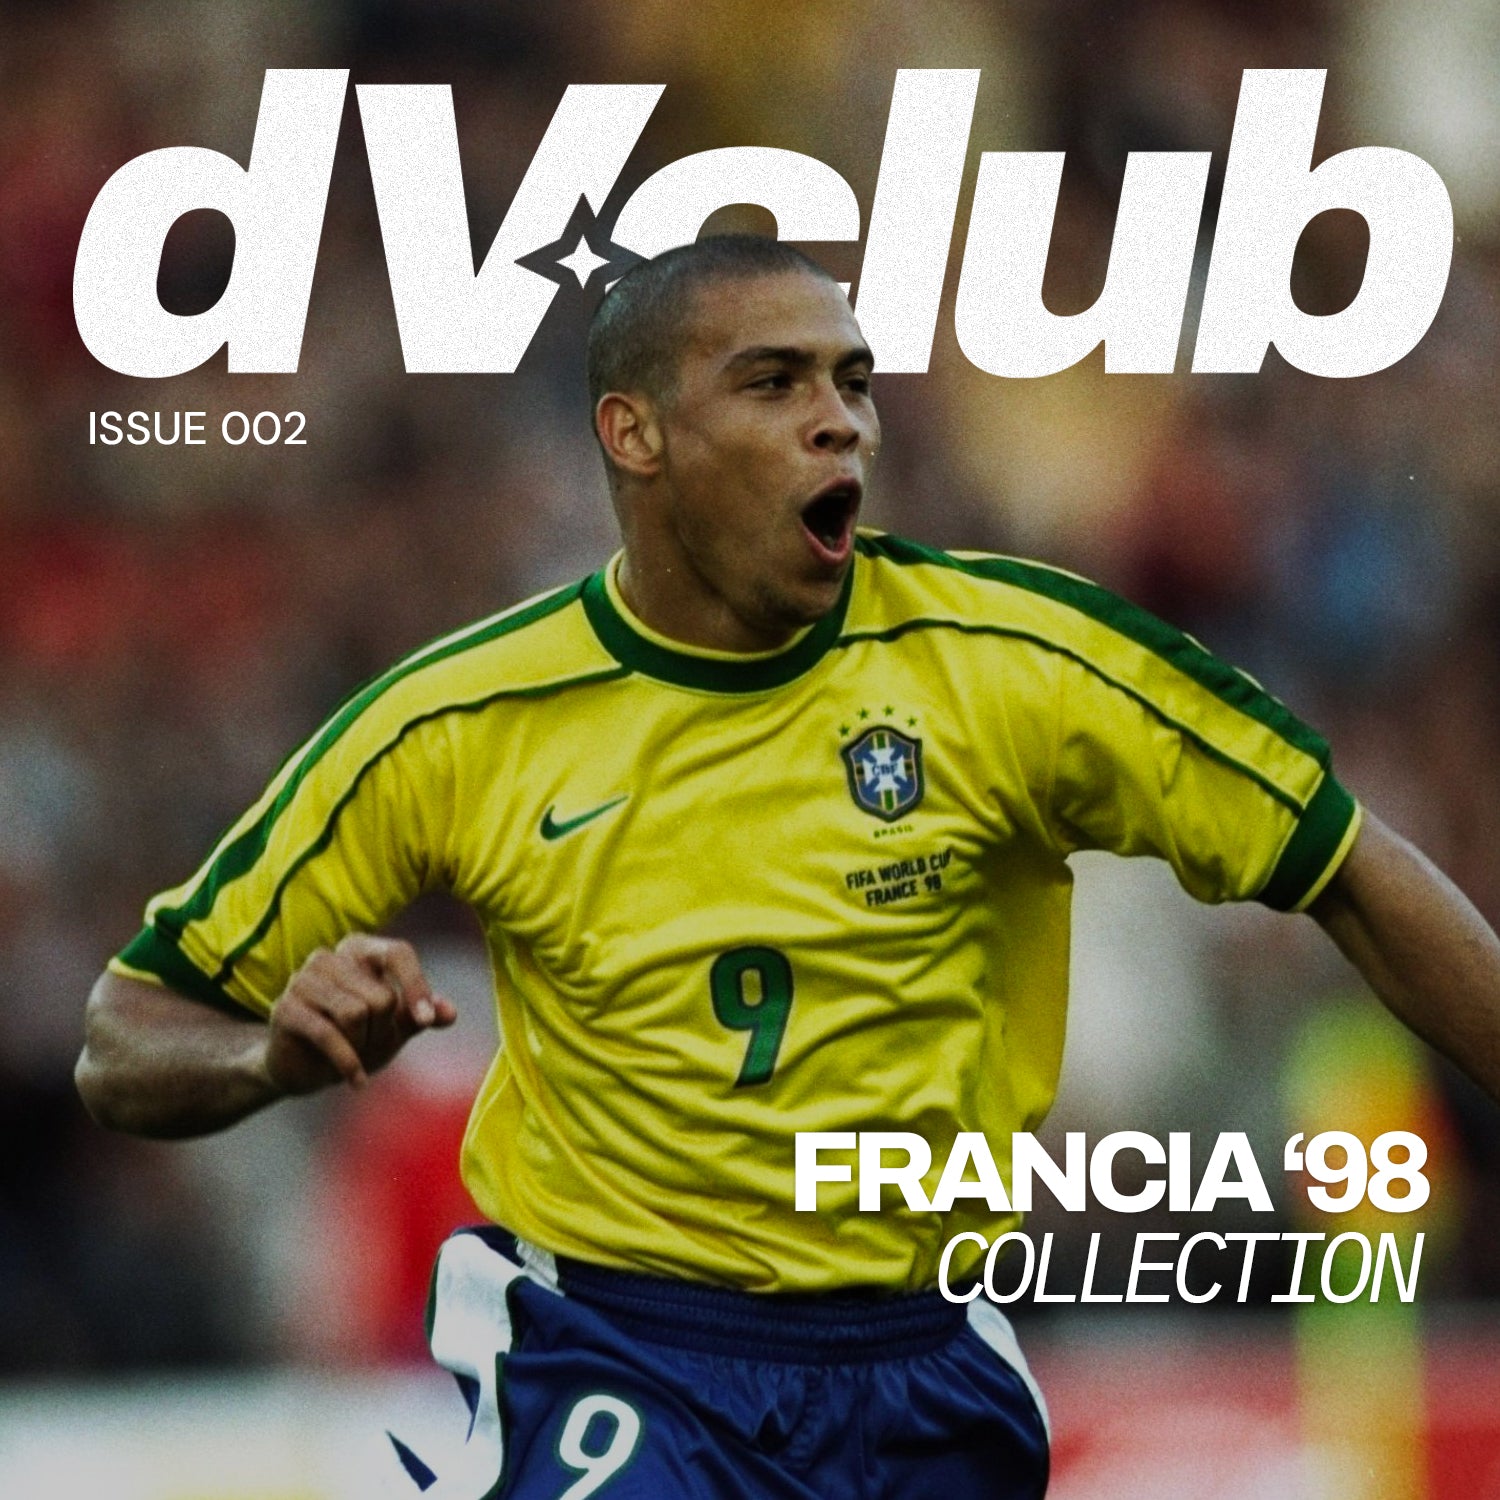 France '98 Collection